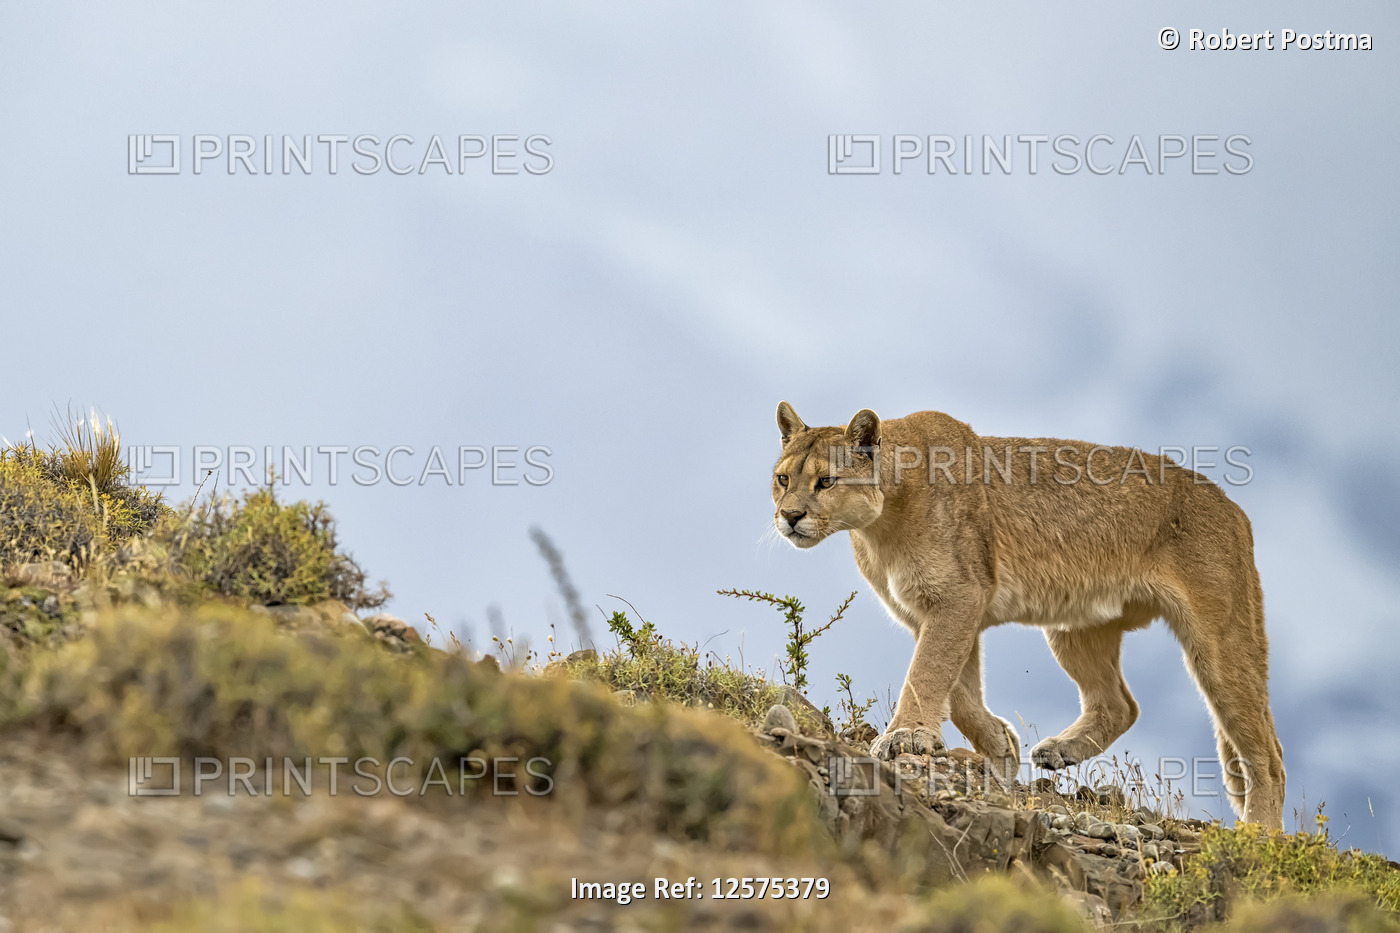 Puma walking through the landscape in Southern Chile; Chile